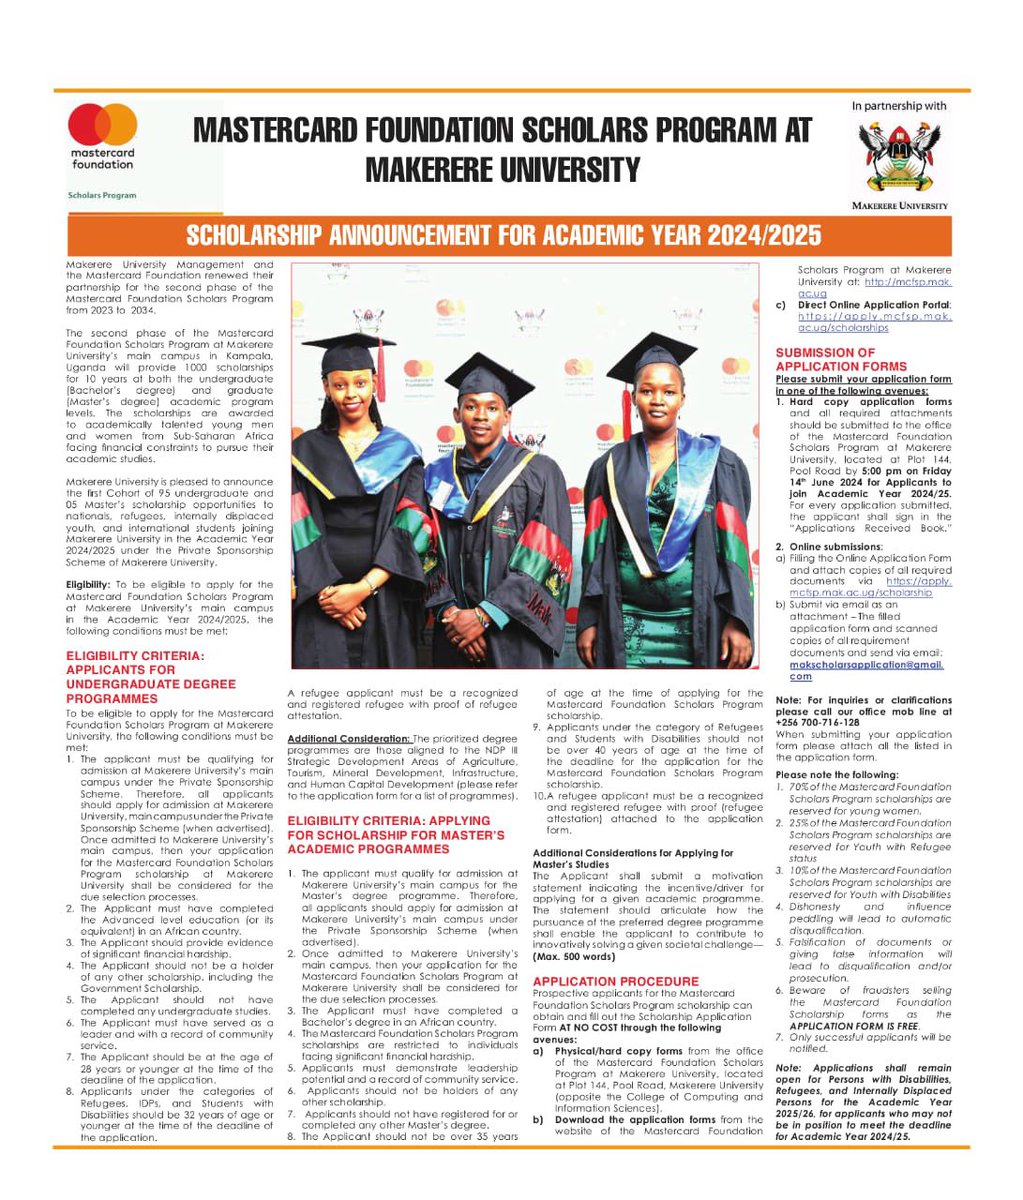 FOR IMMEDIATE RELEASE! Today’s morning MasterCard Foundation Scholars Program @Makerere @MCFMakerere has announced scholarship opportunities for the academic year 2024/2025 for new entrants. Kindly peruse through the attached picture below 👇 for more details.